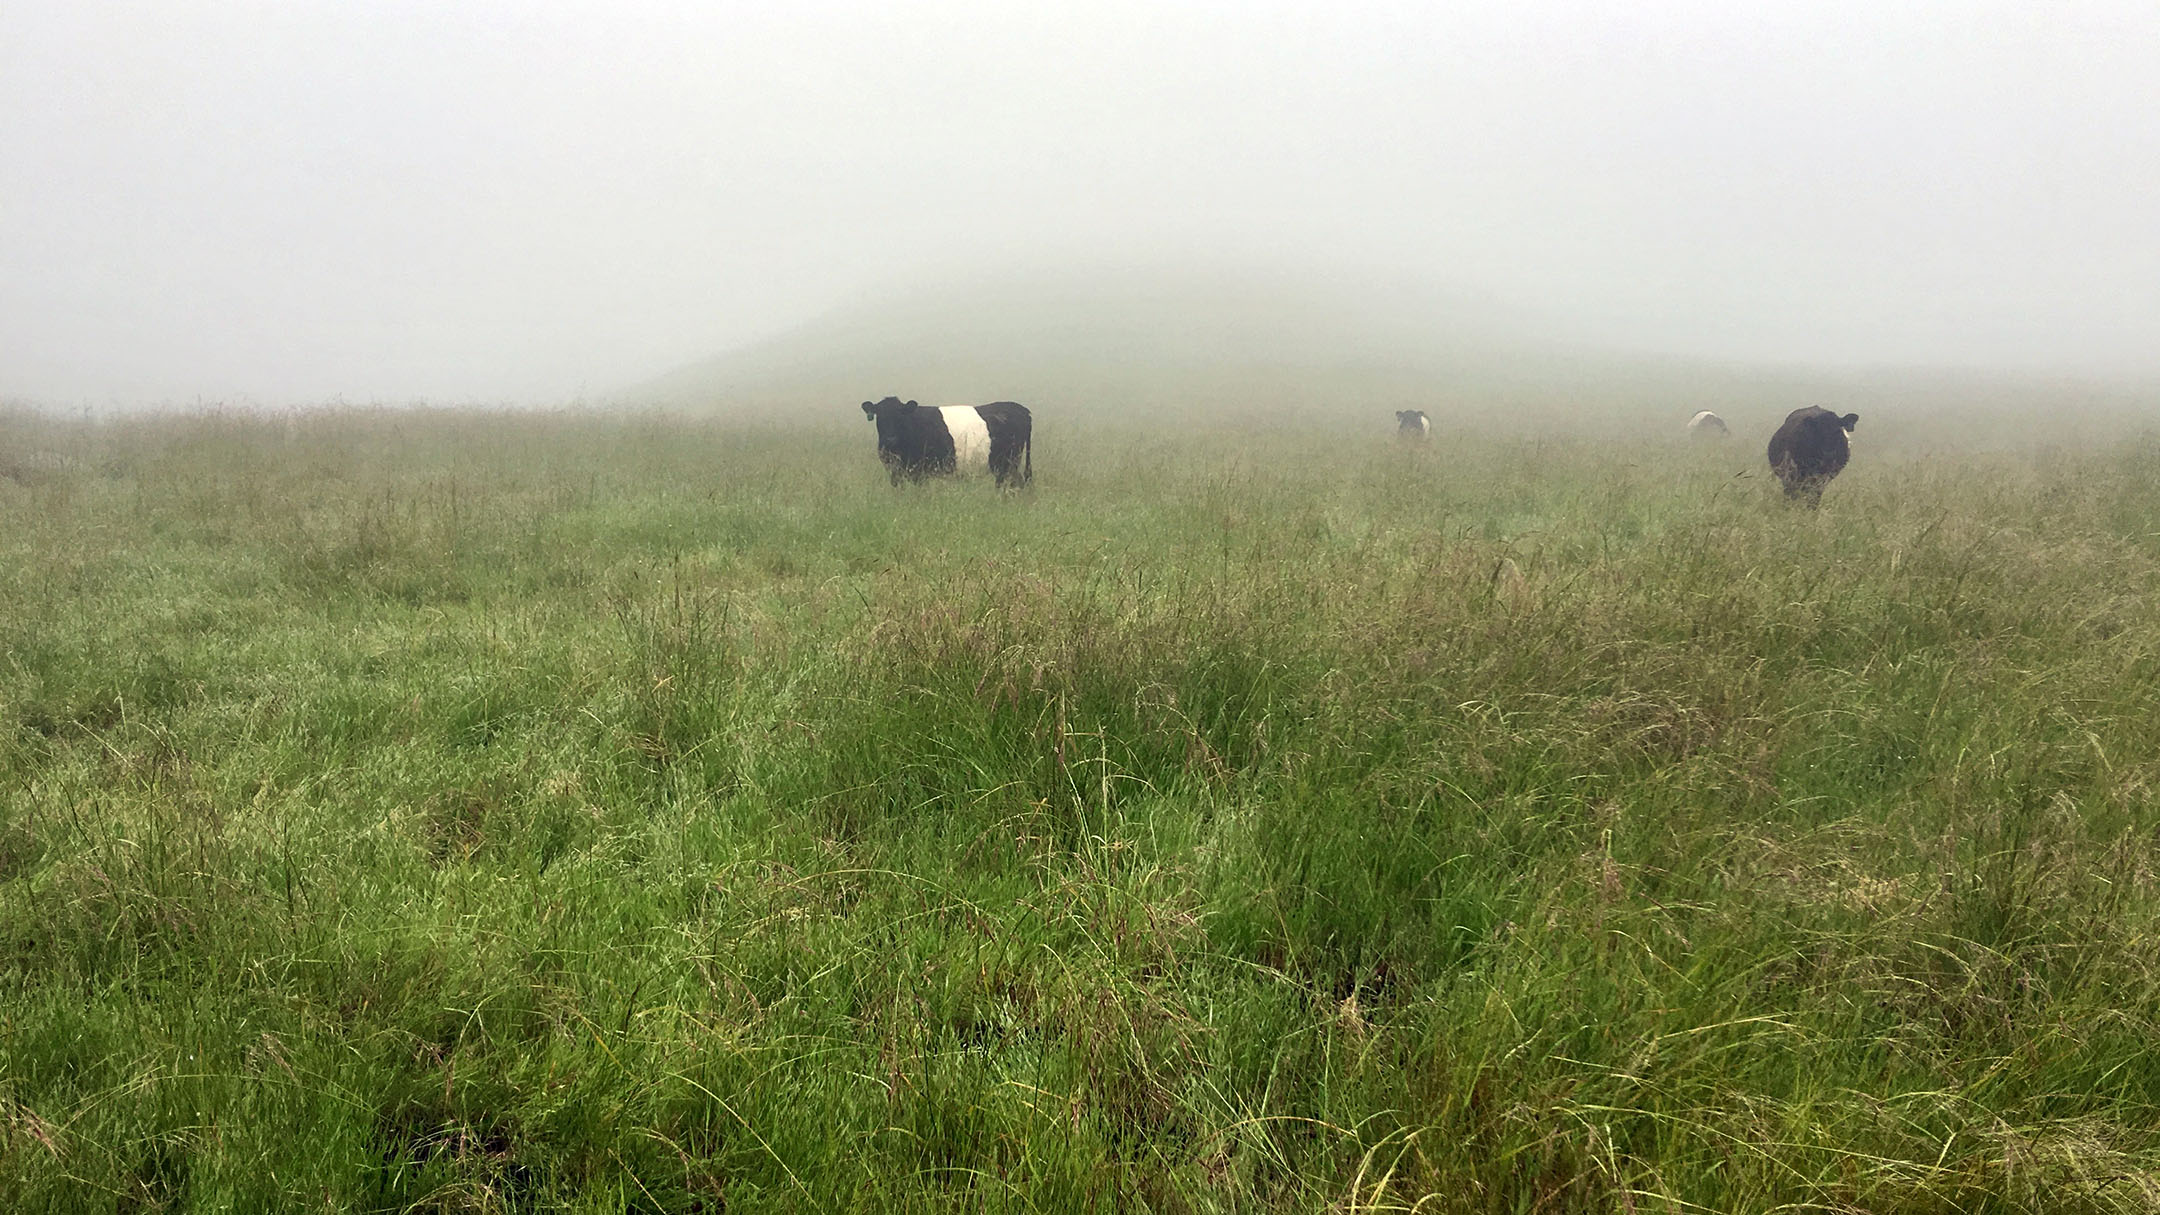 Two cows grazing on a coastal prairie in the fog